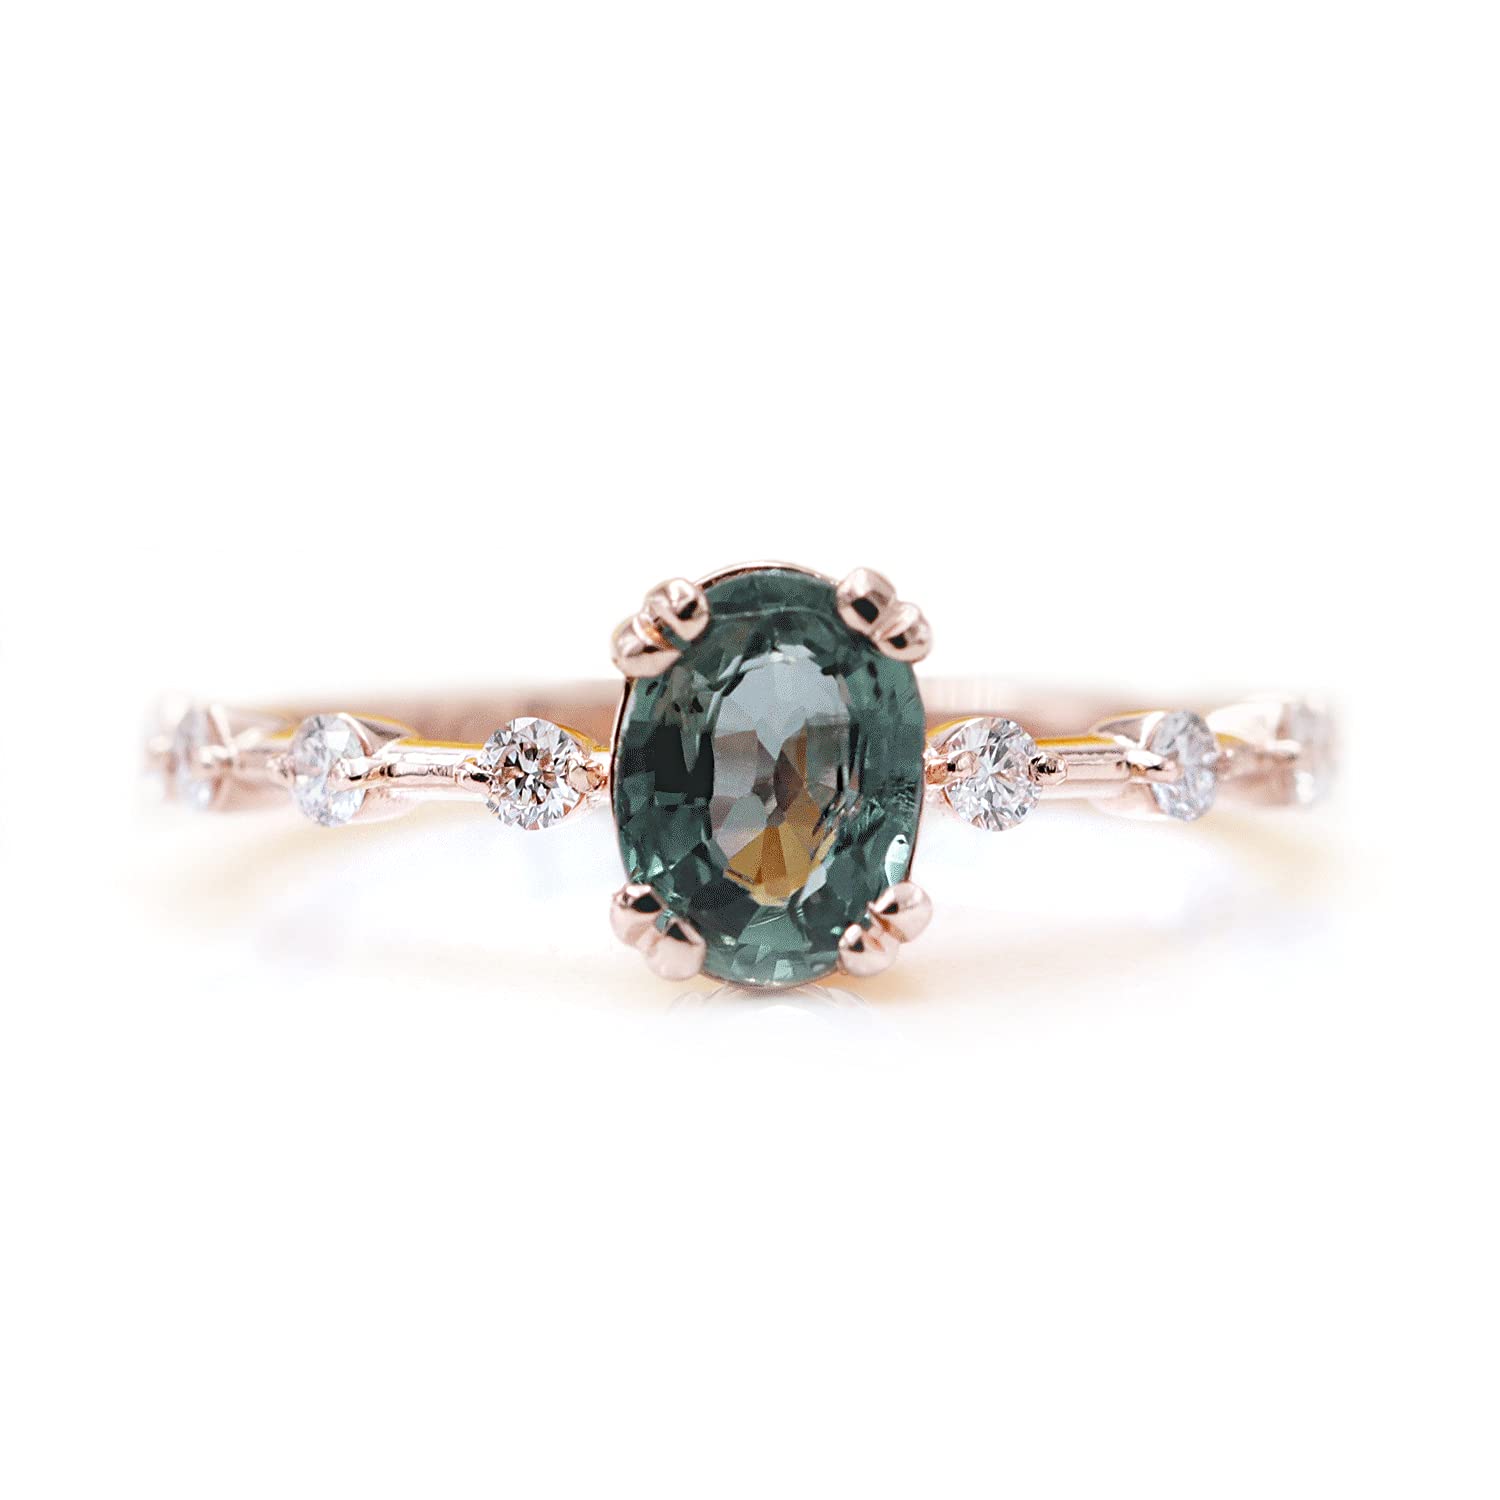 Dazzling green sapphire stone with six diamond beads in the body